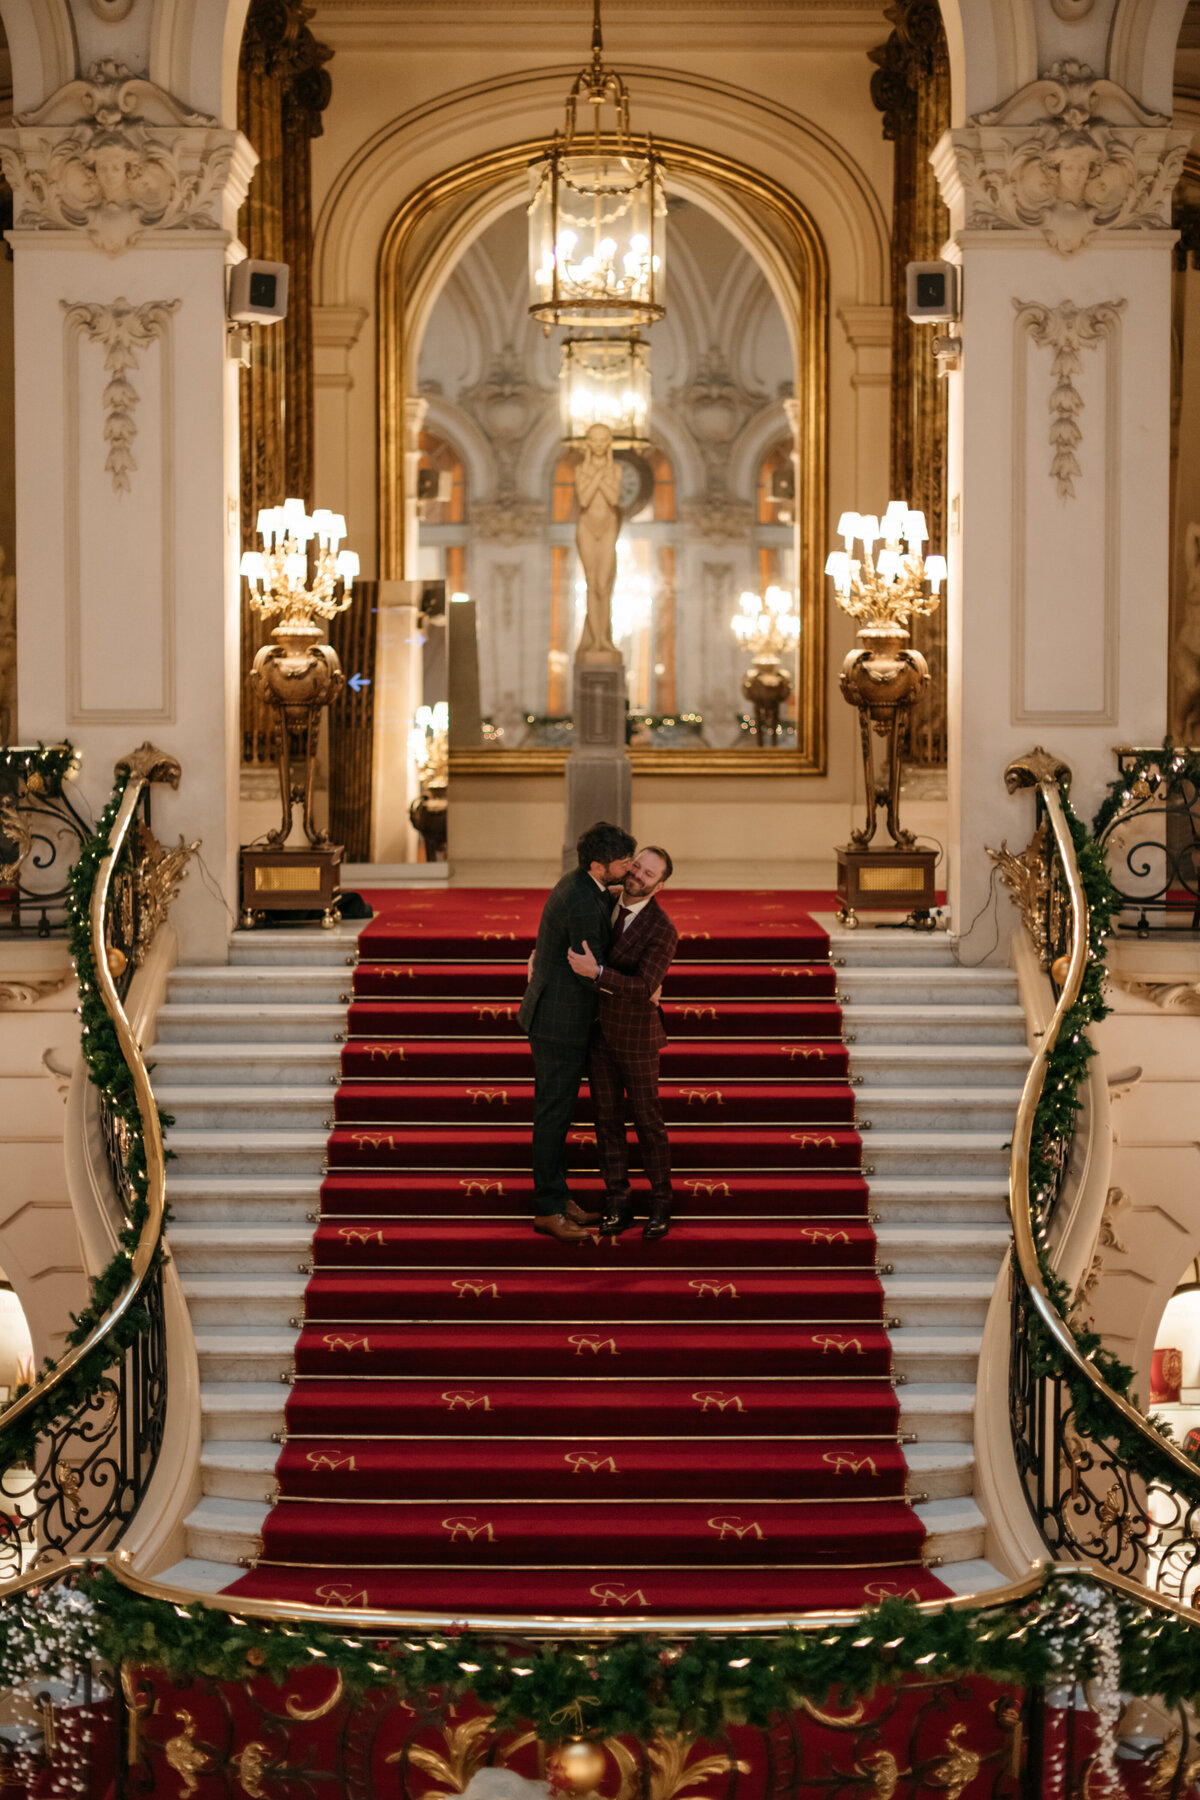 The grand staircase of a wedding venue